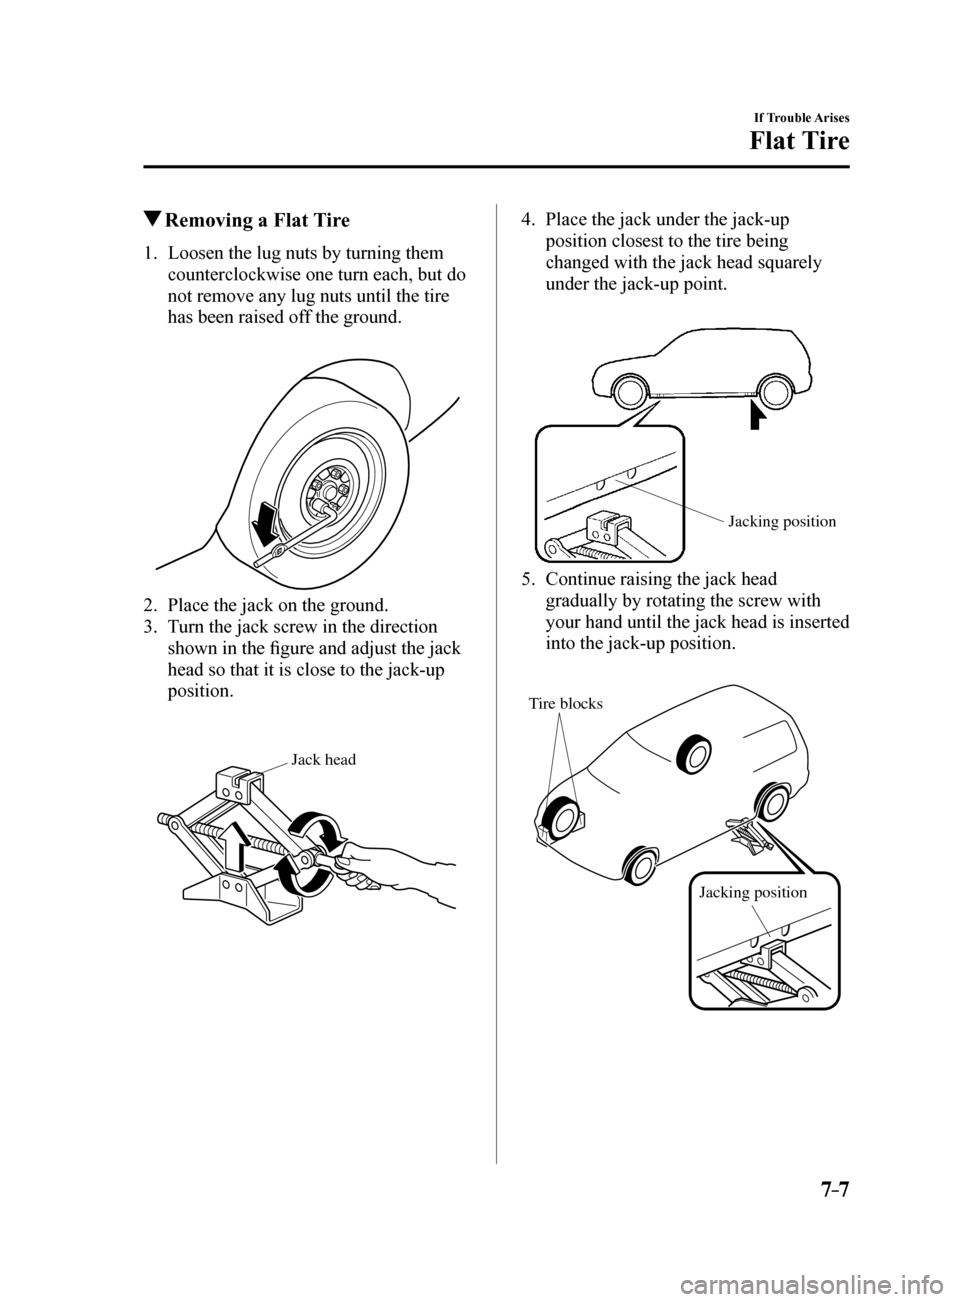 MAZDA MODEL 6 2017  Owners Manual (in English) 7–7
If Trouble Arises
Flat Tire
 Removing a Flat Tire
1.  Loosen the lug nuts by turning them 
counterclockwise one turn each, but do 
not remove any lug nuts until the tire 
has been raised off the